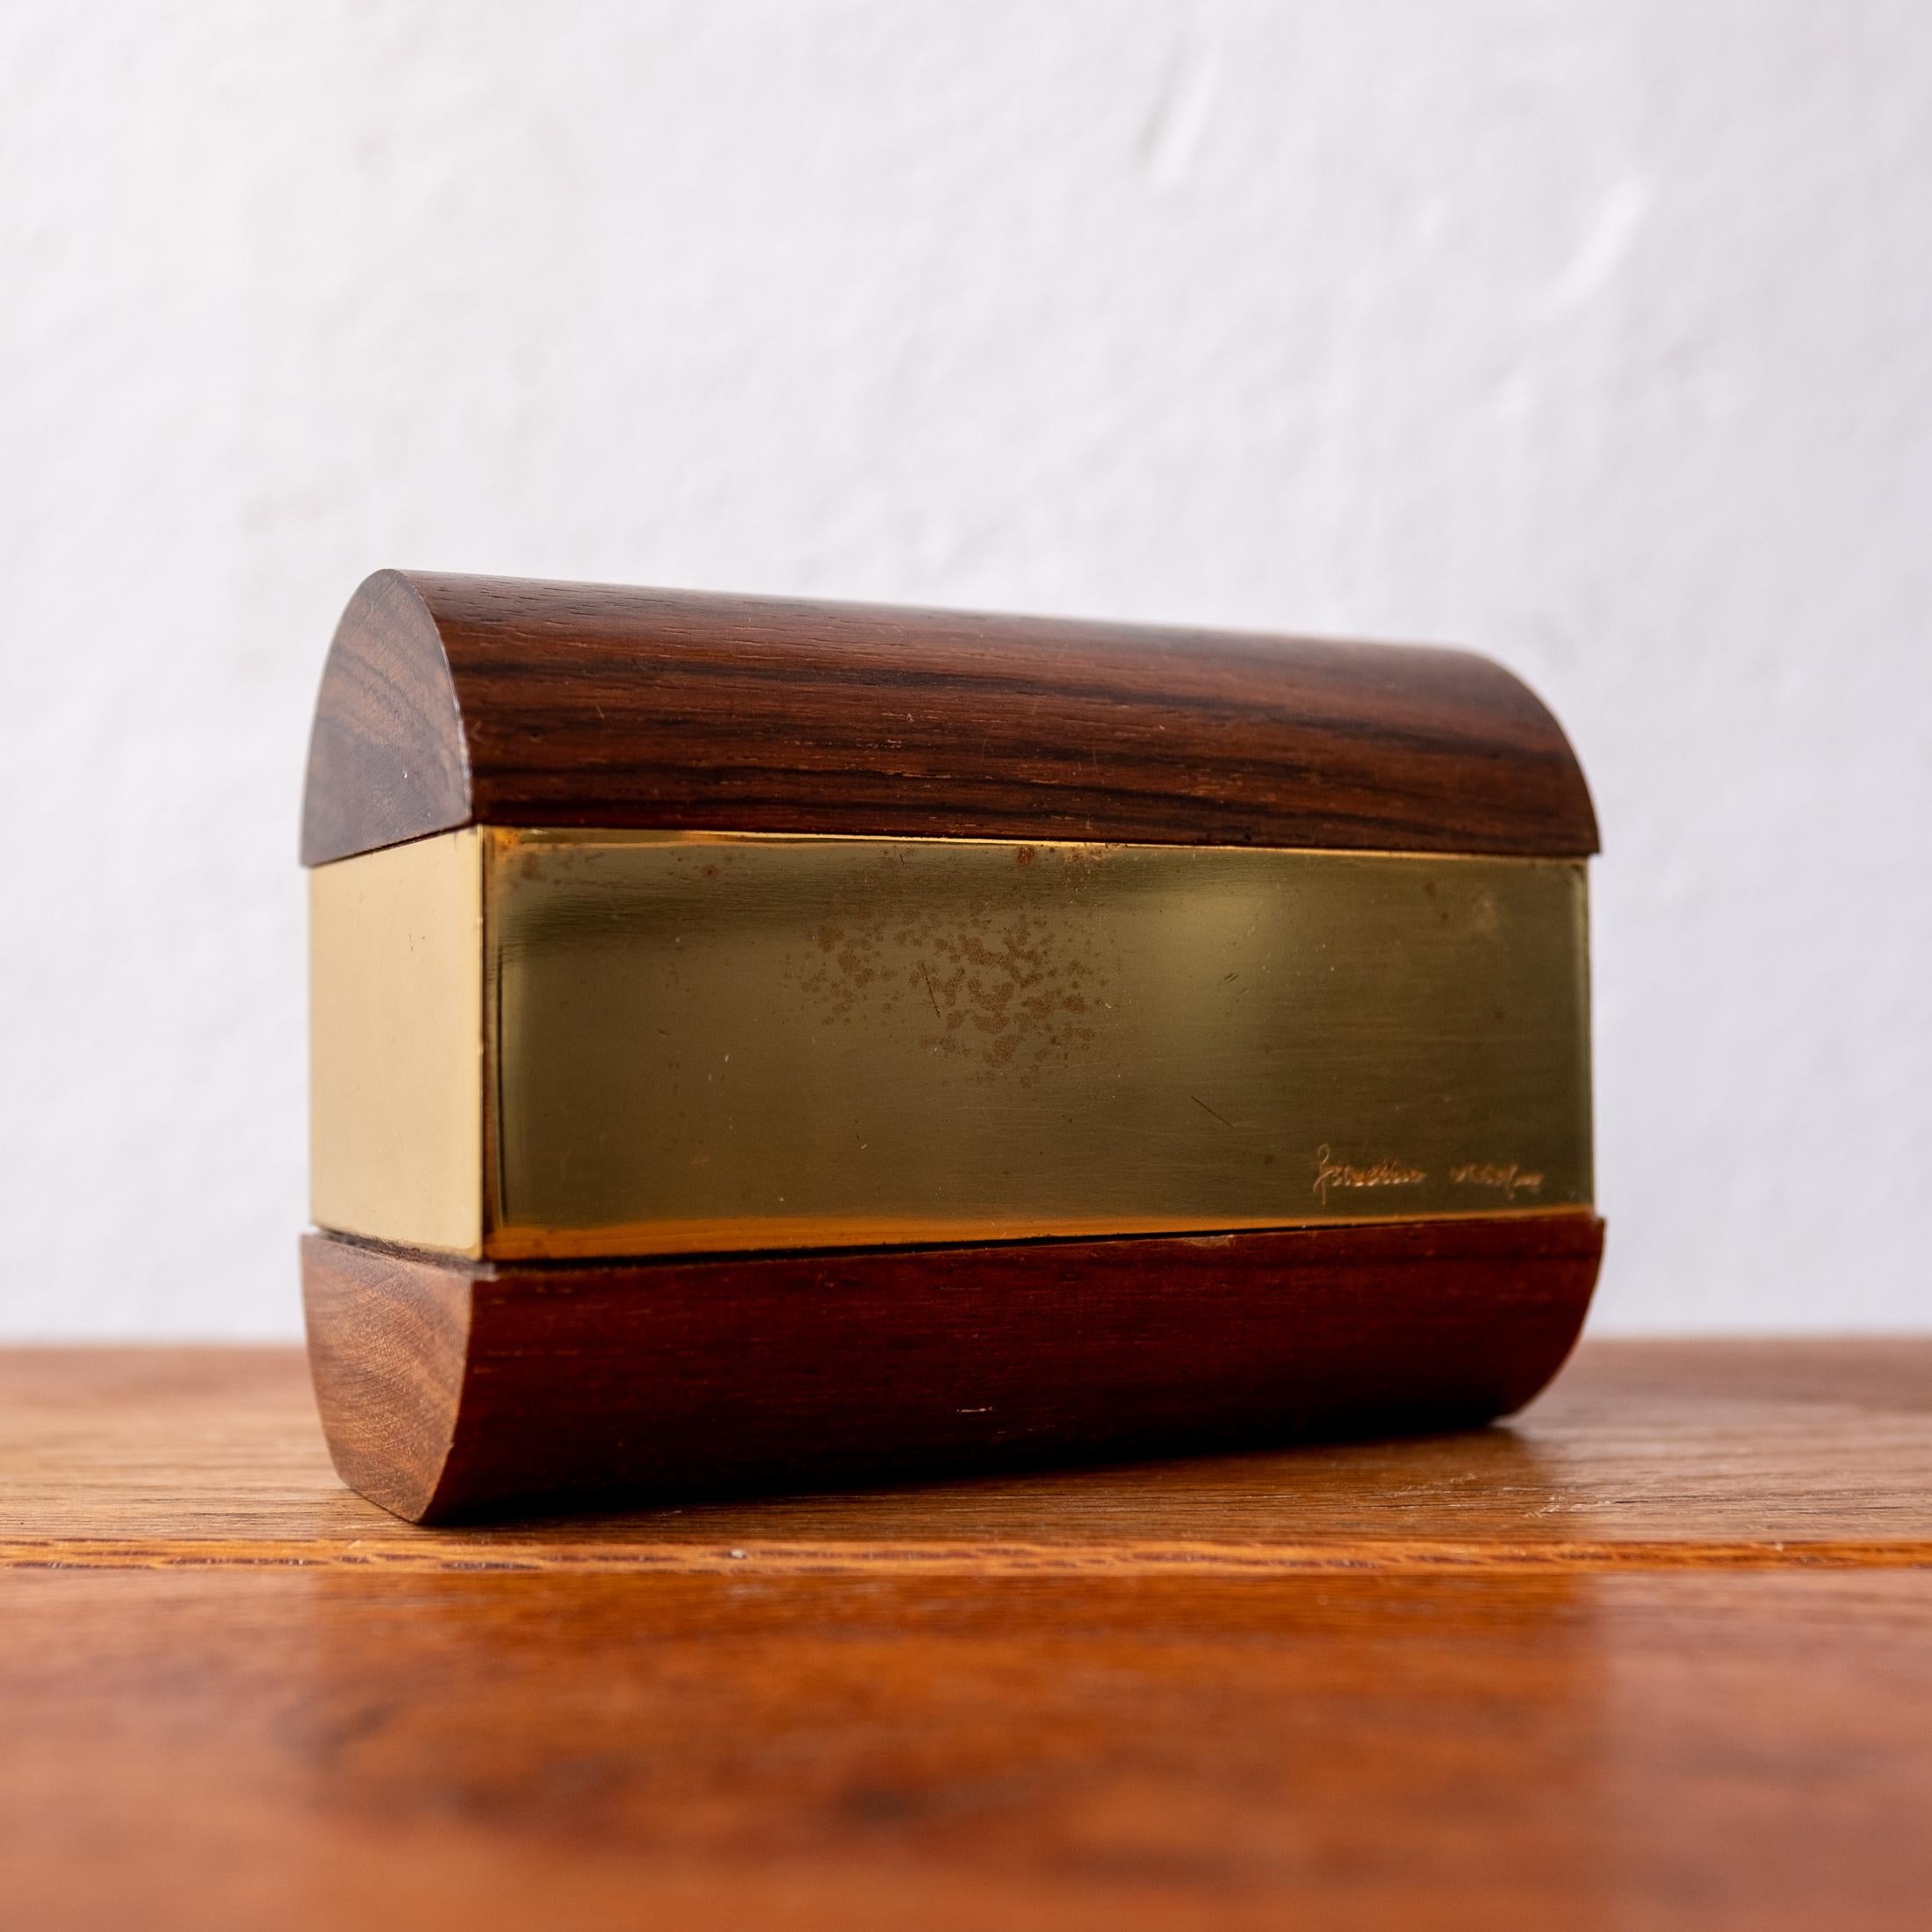 Gabriella Crespi Wood and Brass Box, 1970s For Sale 2